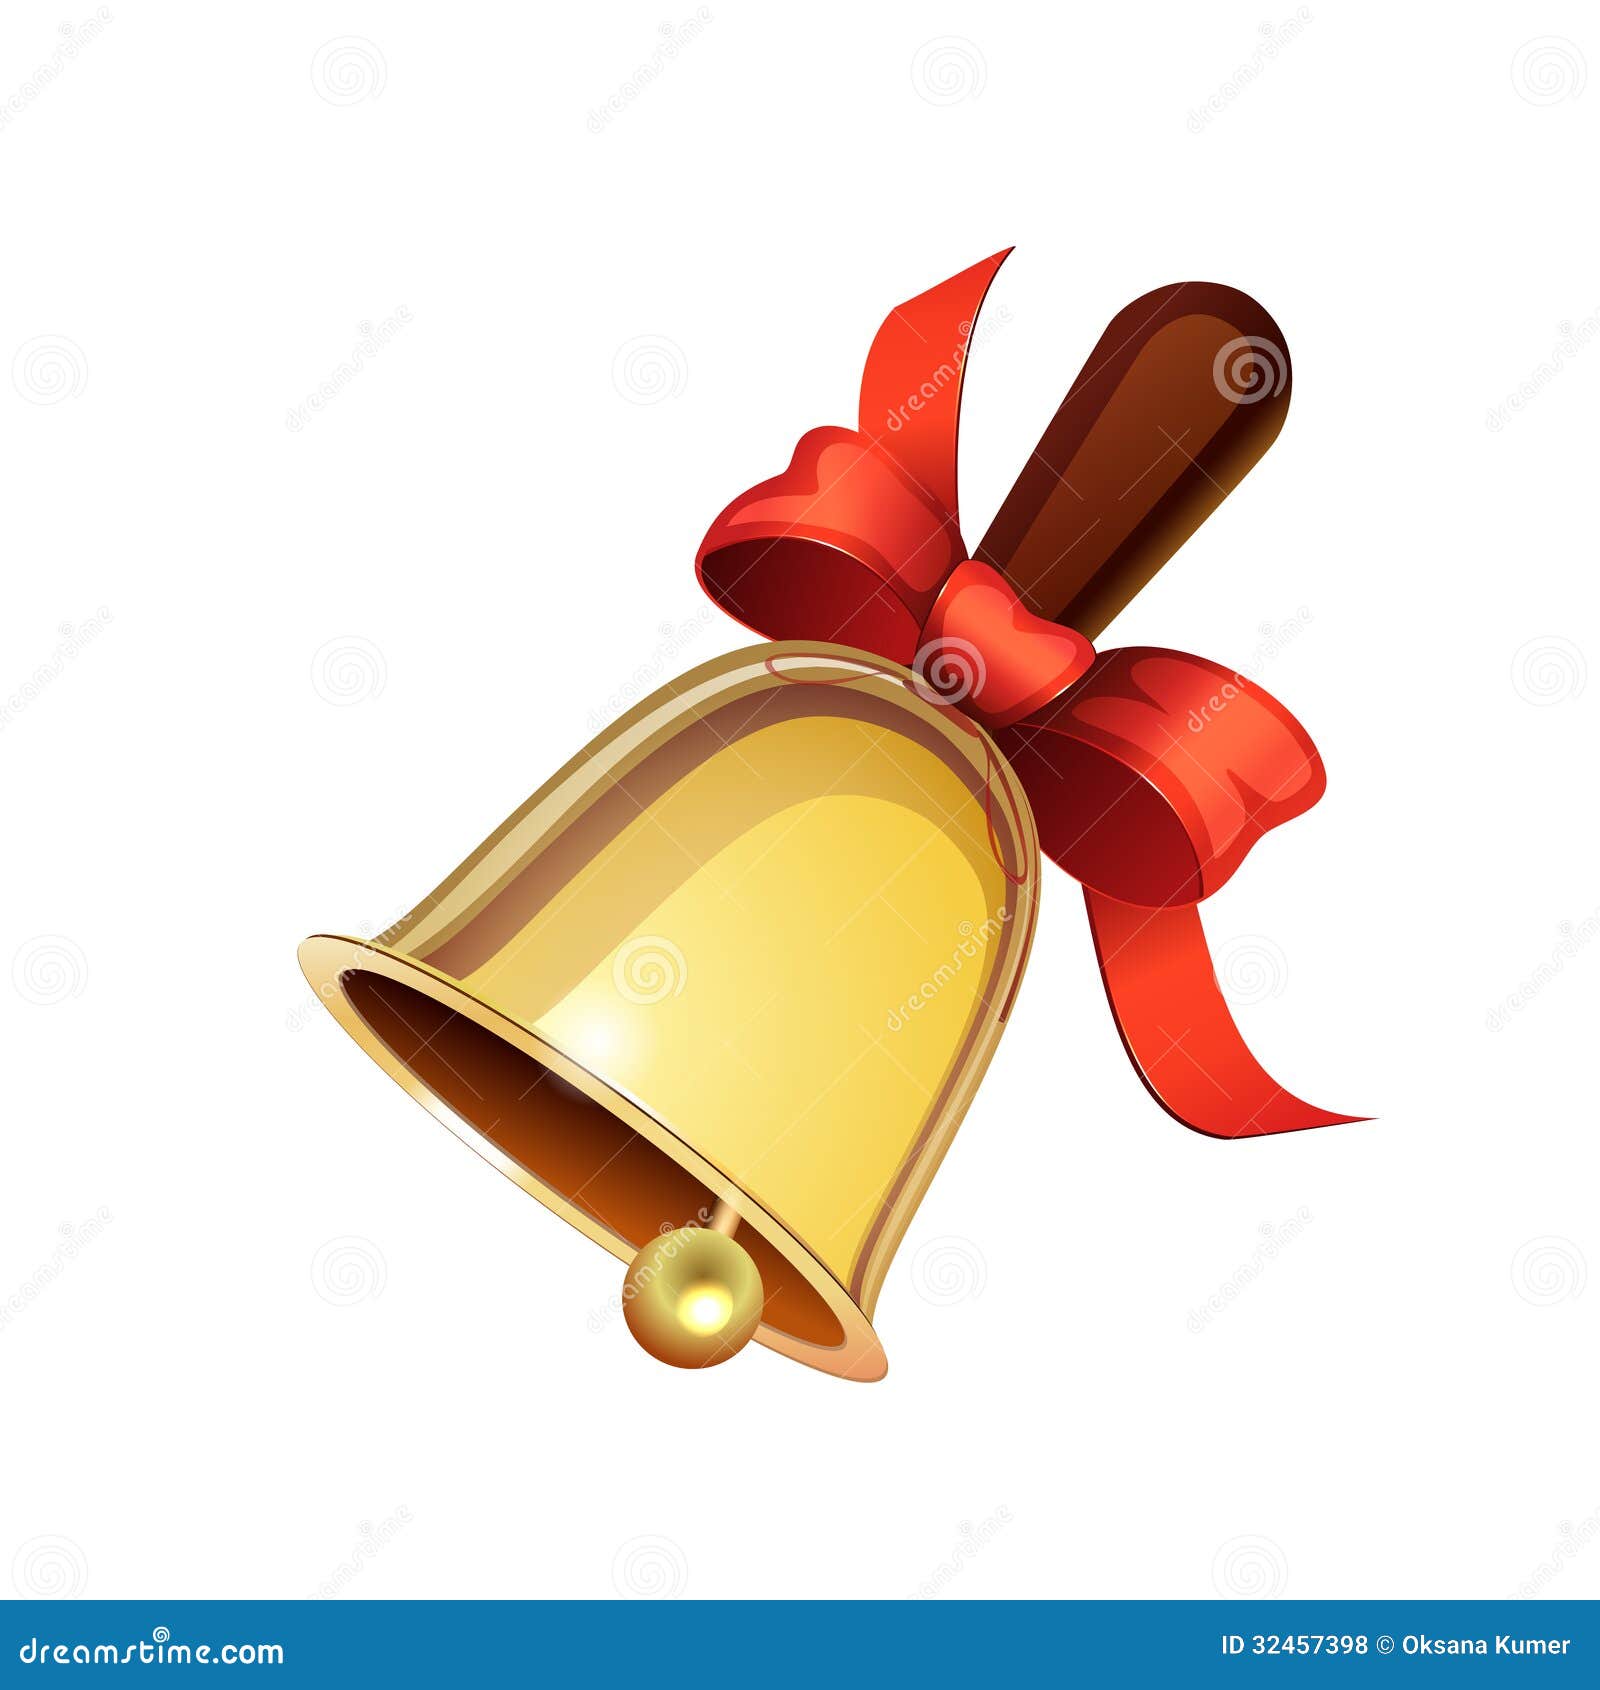 clipart school bell ringing - photo #35